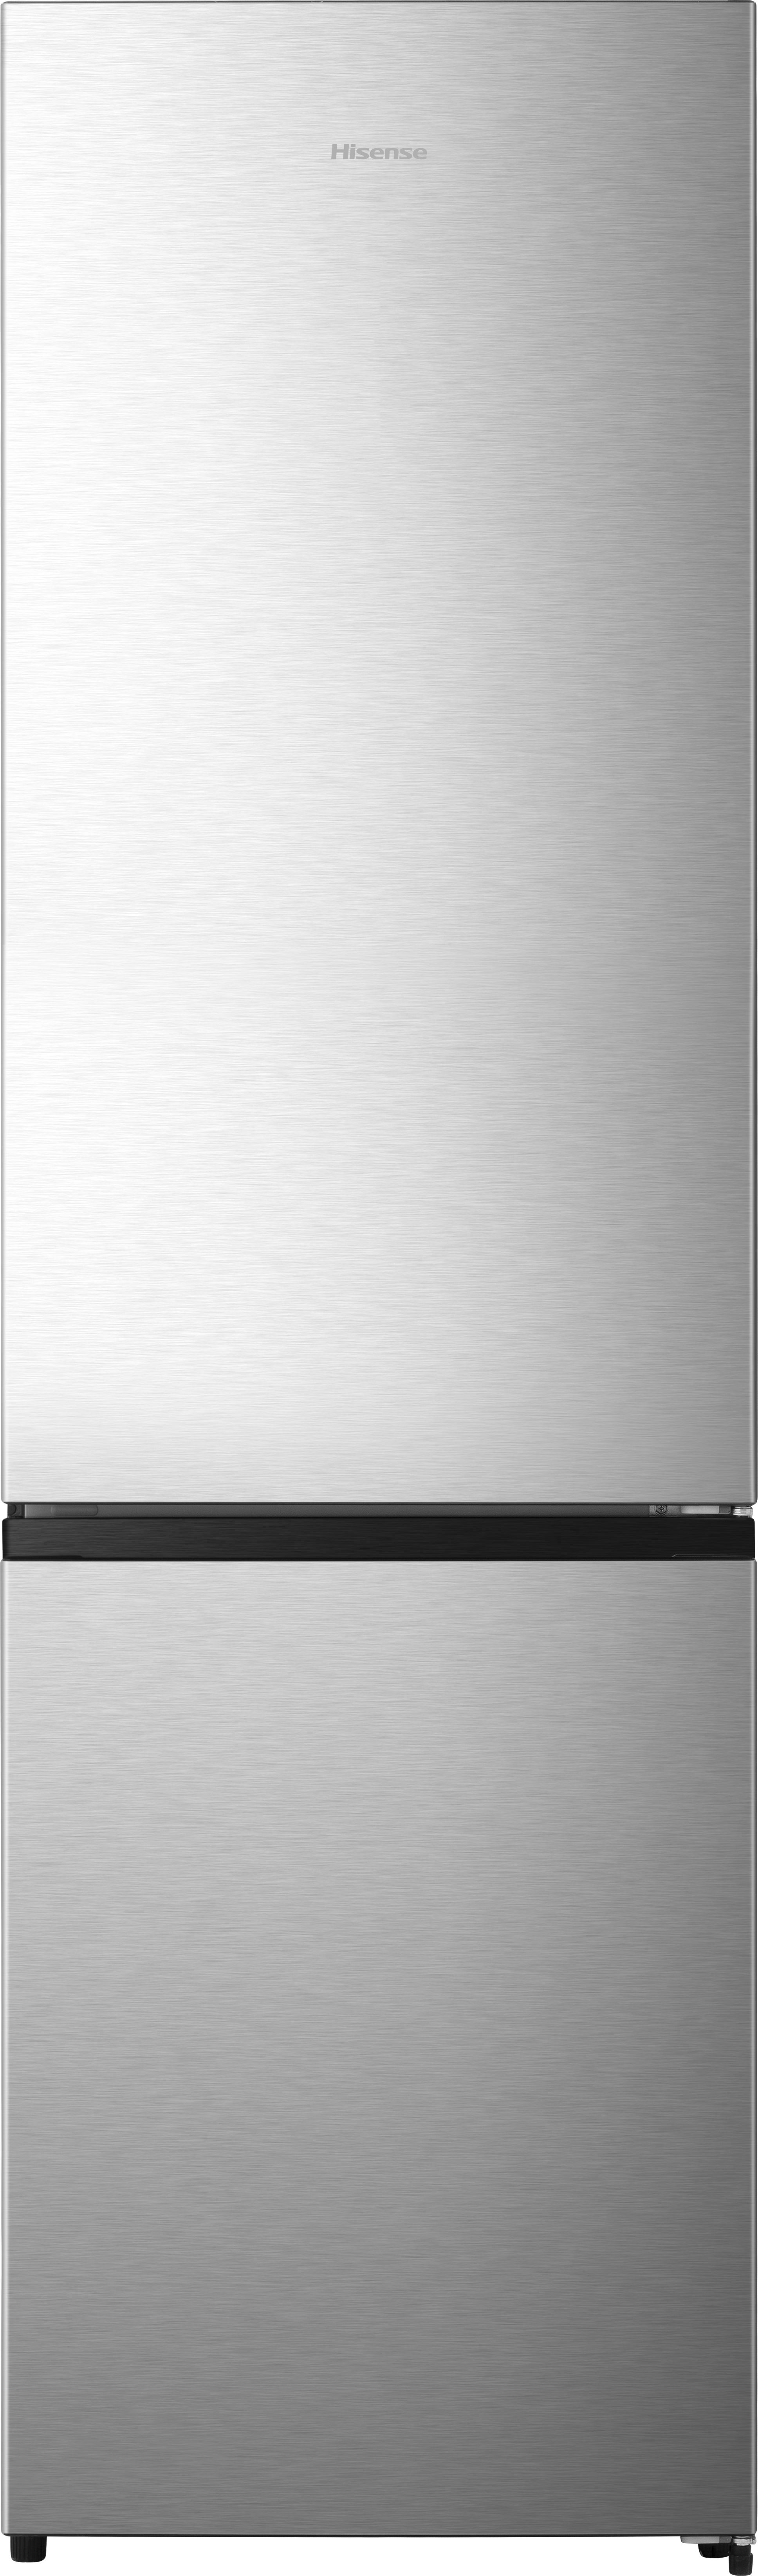 Hisense RB435N4BCE 70/30 No Frost Fridge Freezer - Stainless Steel - E Rated, Stainless Steel